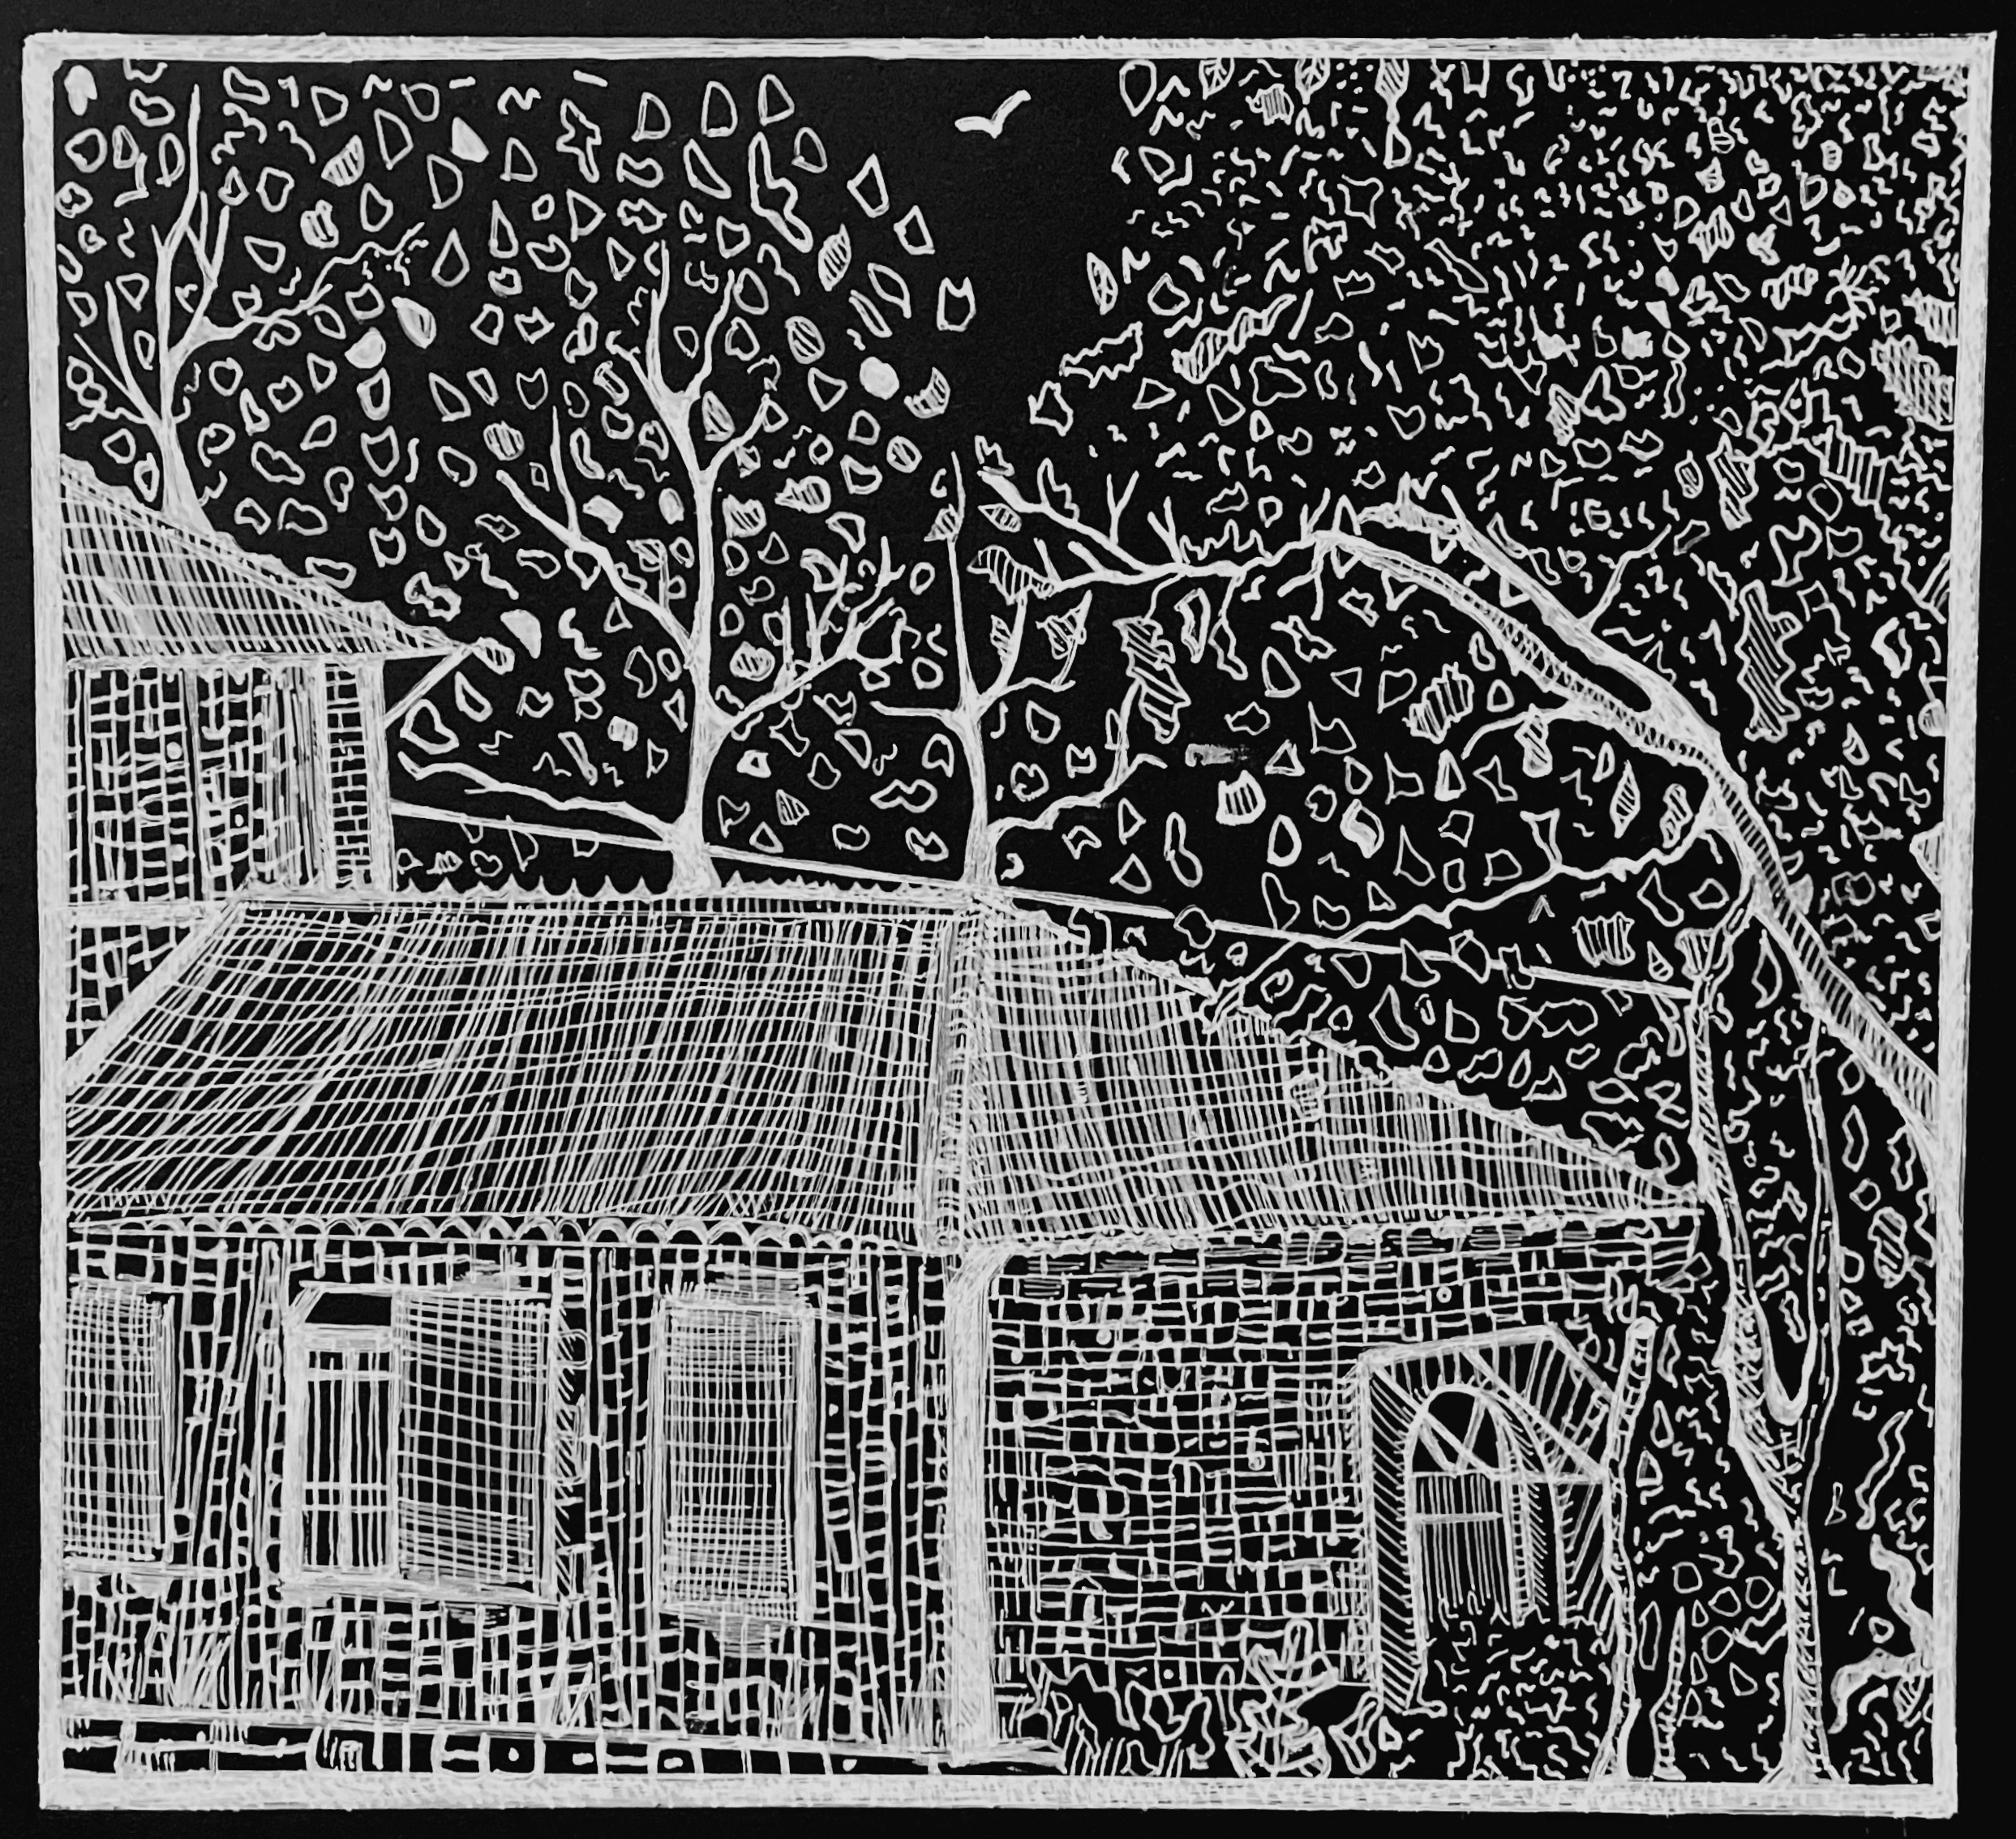 Square drawing using white ink on black paper. Drawing depicts a structure in the lower left corner from the side showing three windows on the left side, with a door on the front. Behind the structure is a taller building. Some trees and abstract foliage shapes fill the background and foreground. 